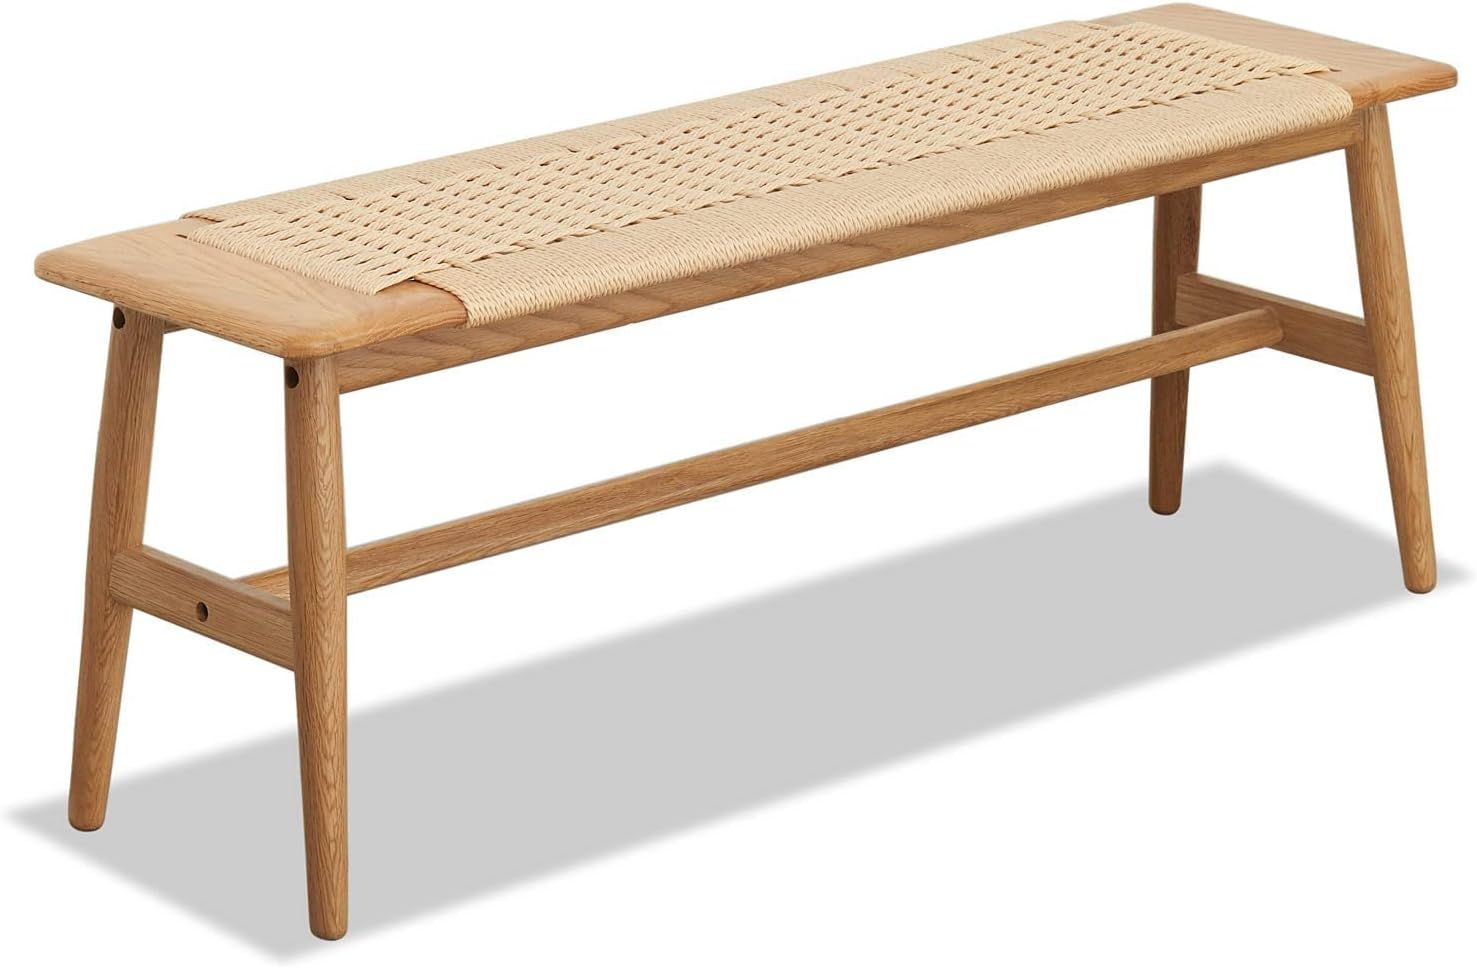 Fancyarn Woven Design Natural Oak Wood Dining Bench Bed Bench for Dining Room, Bedroom, Bathroom | Amazon (US)